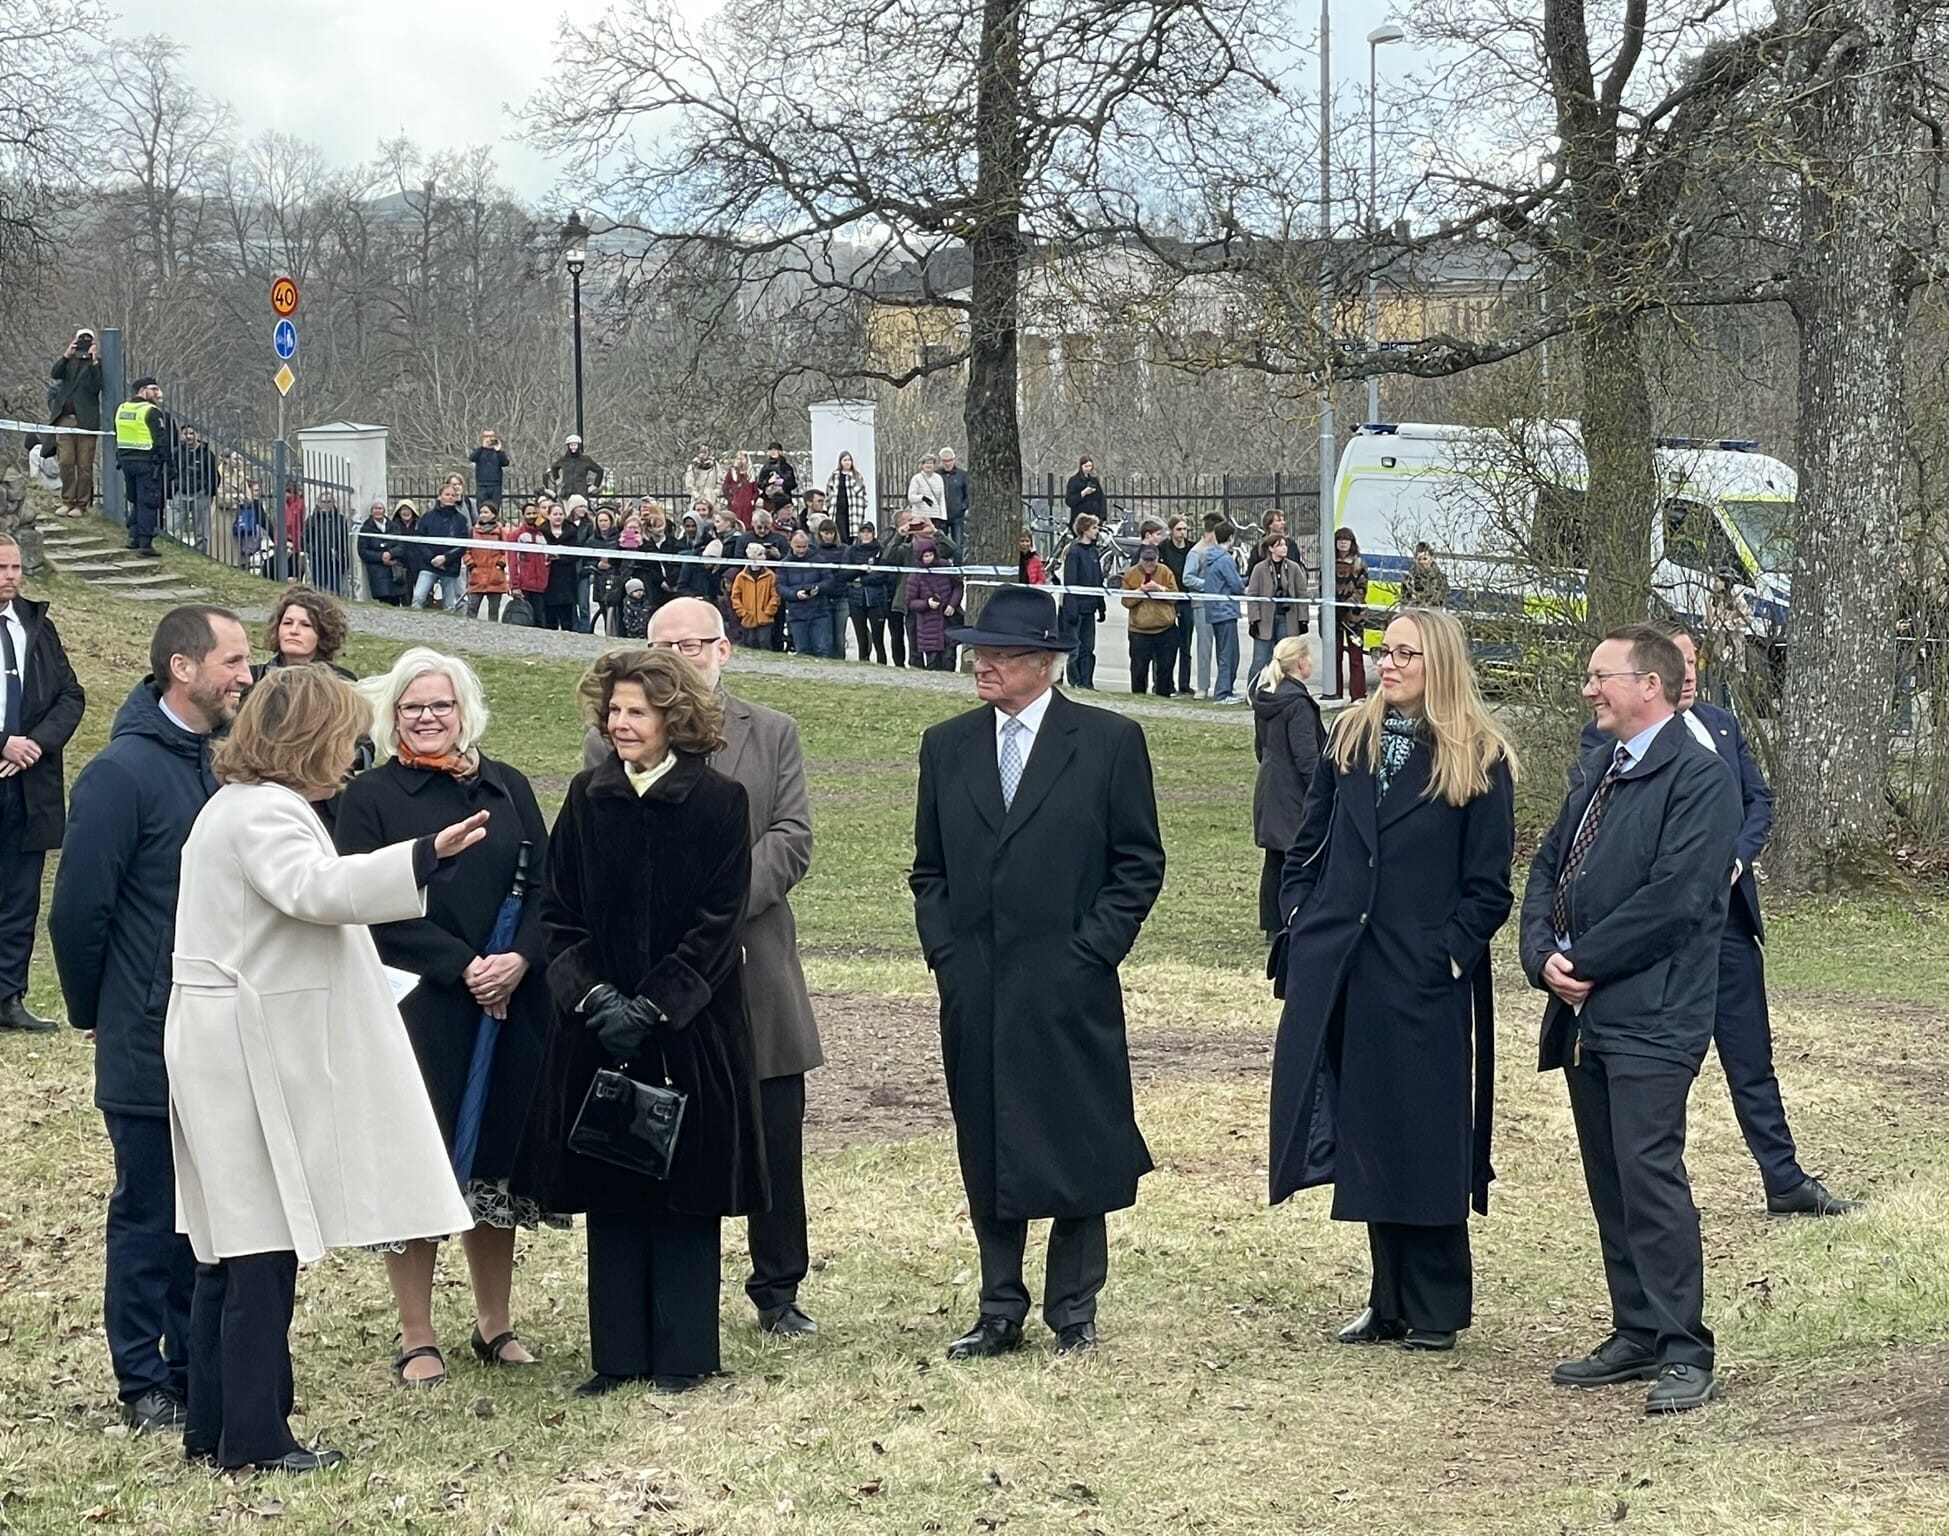 King Carl XVI Gustaf and Queen Silvia visited Uppsala to celebrate the King’s 50 years as Chief of State. From right to left are: Ulrik Beste, CFO and Isabelle Bodén, Customer relations, VBN Components, King Carl XVI Gustaf of Sweden, Queen Silvia of Sweden.